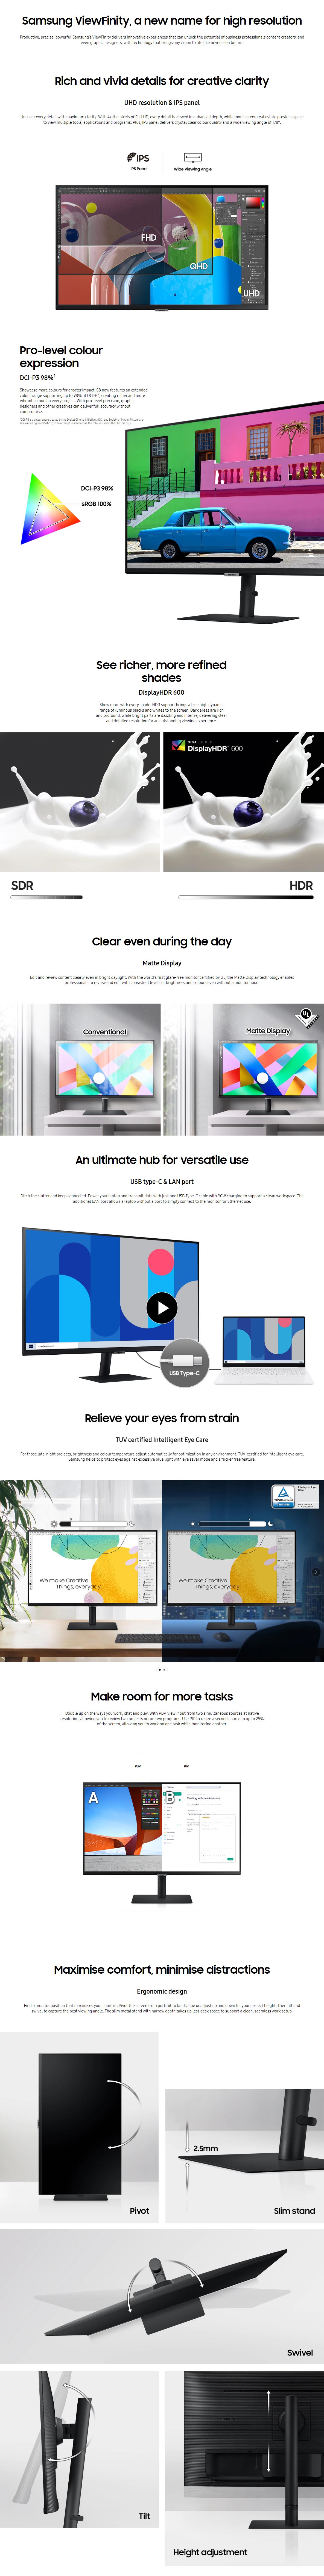 A large marketing image providing additional information about the product Samsung ViewFinity S80PB 27" UHD 4K 60Hz IPS Monitor - Additional alt info not provided